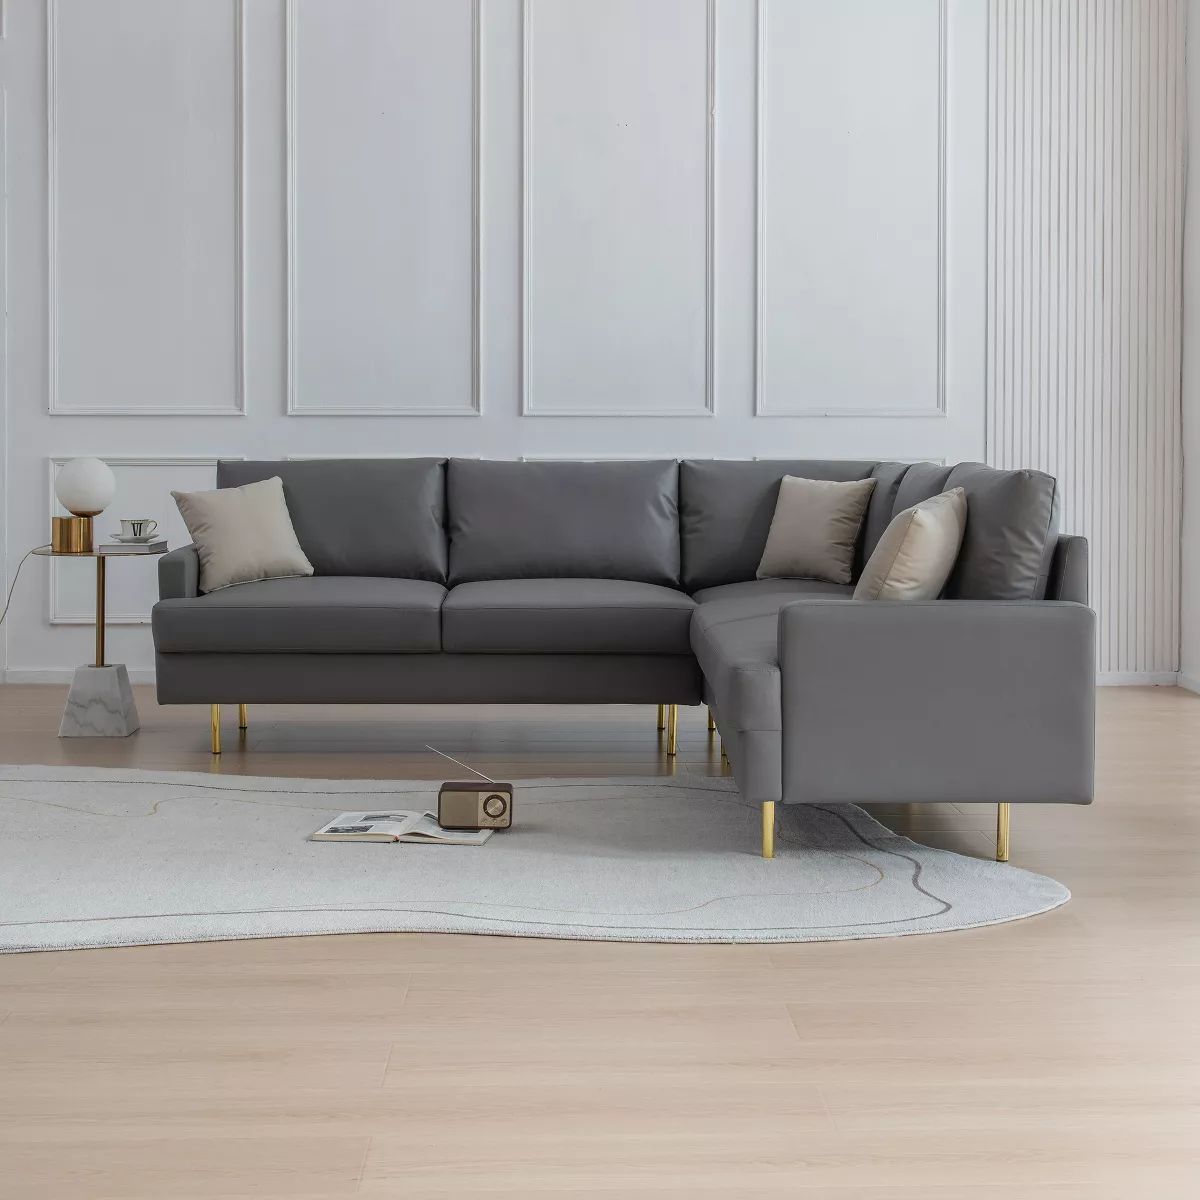 89.8" L-Shaped Corner Sectional Technical Leather Sofa with Pillows 4A - ModernLuxe | Target